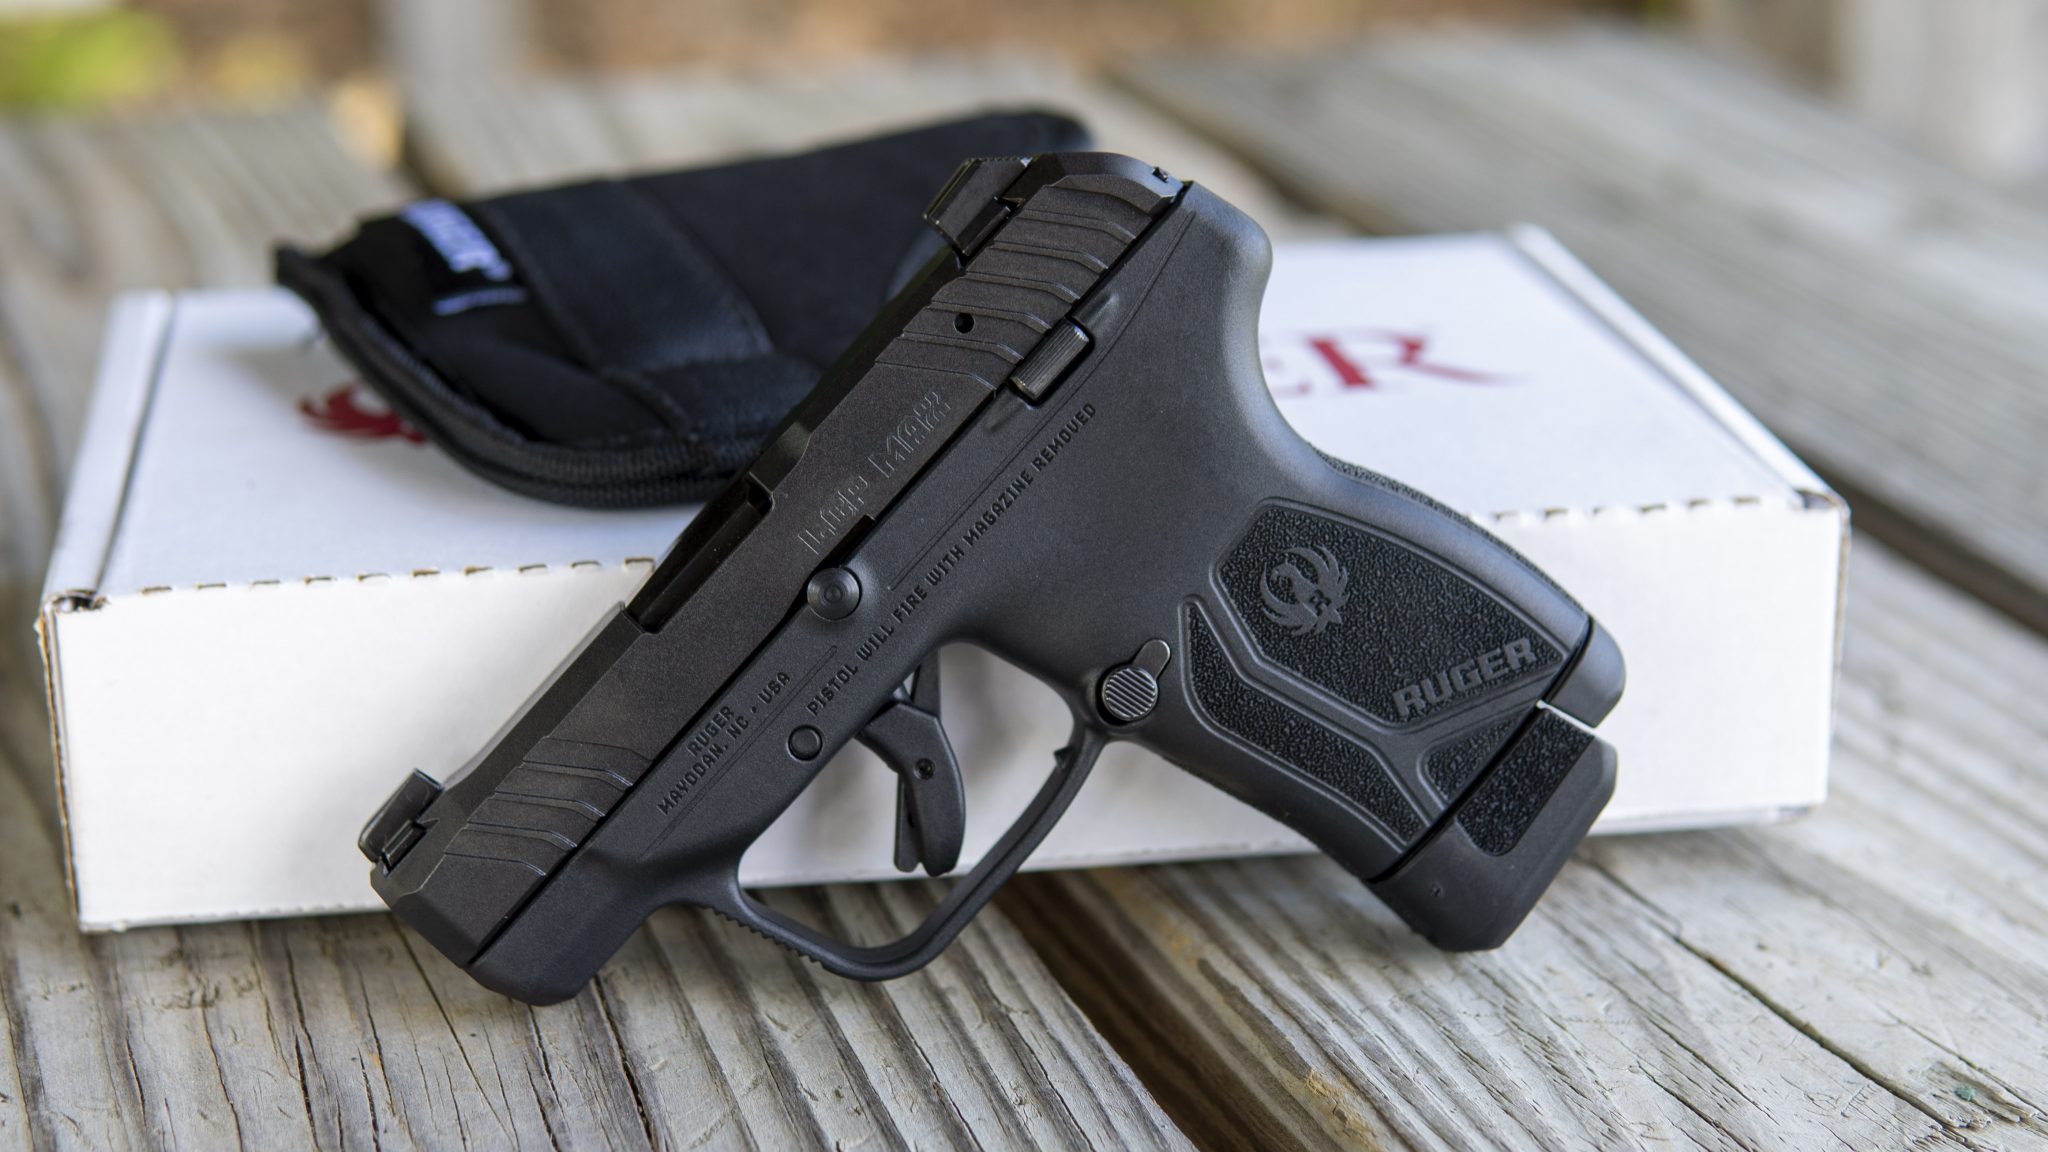 Ruger’s New LCP MAX - The BEST Pocket Carry Pistol! 